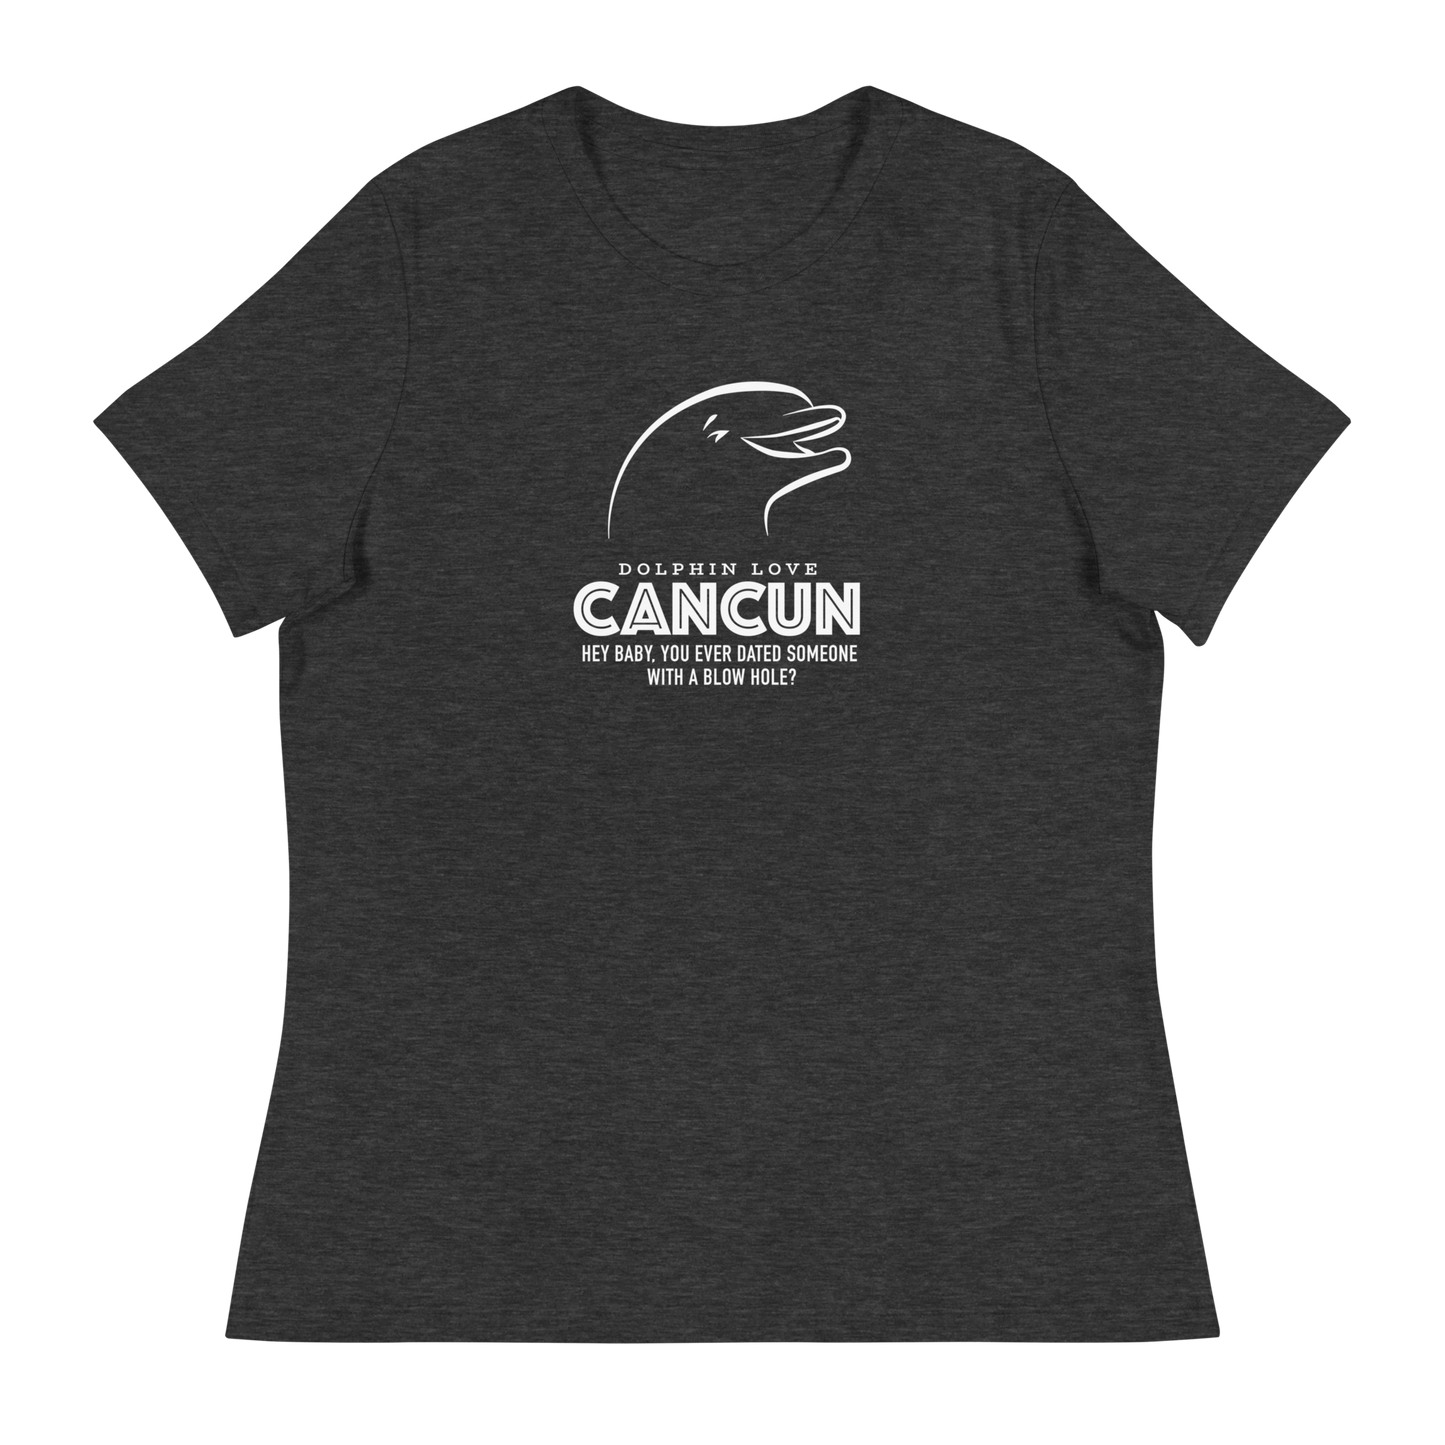 Women's - CANCUN - Hey Baby, ever dated anyone with a blow hole before? Dolphin - Funny T-Shirt